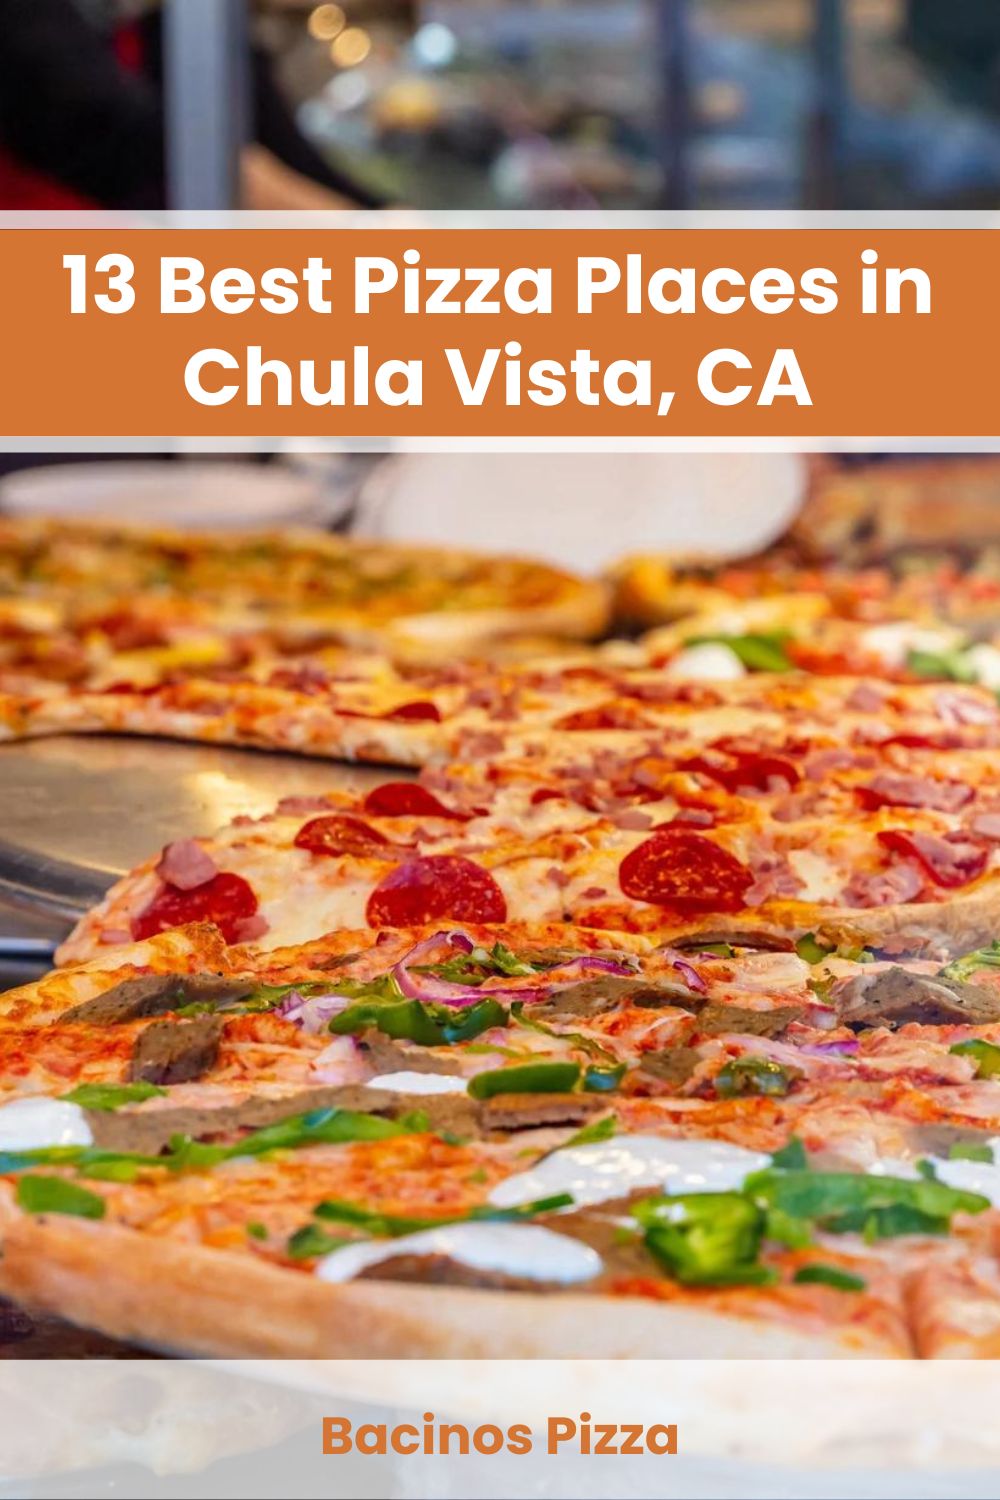 Best Pizza Places in Chula Vista